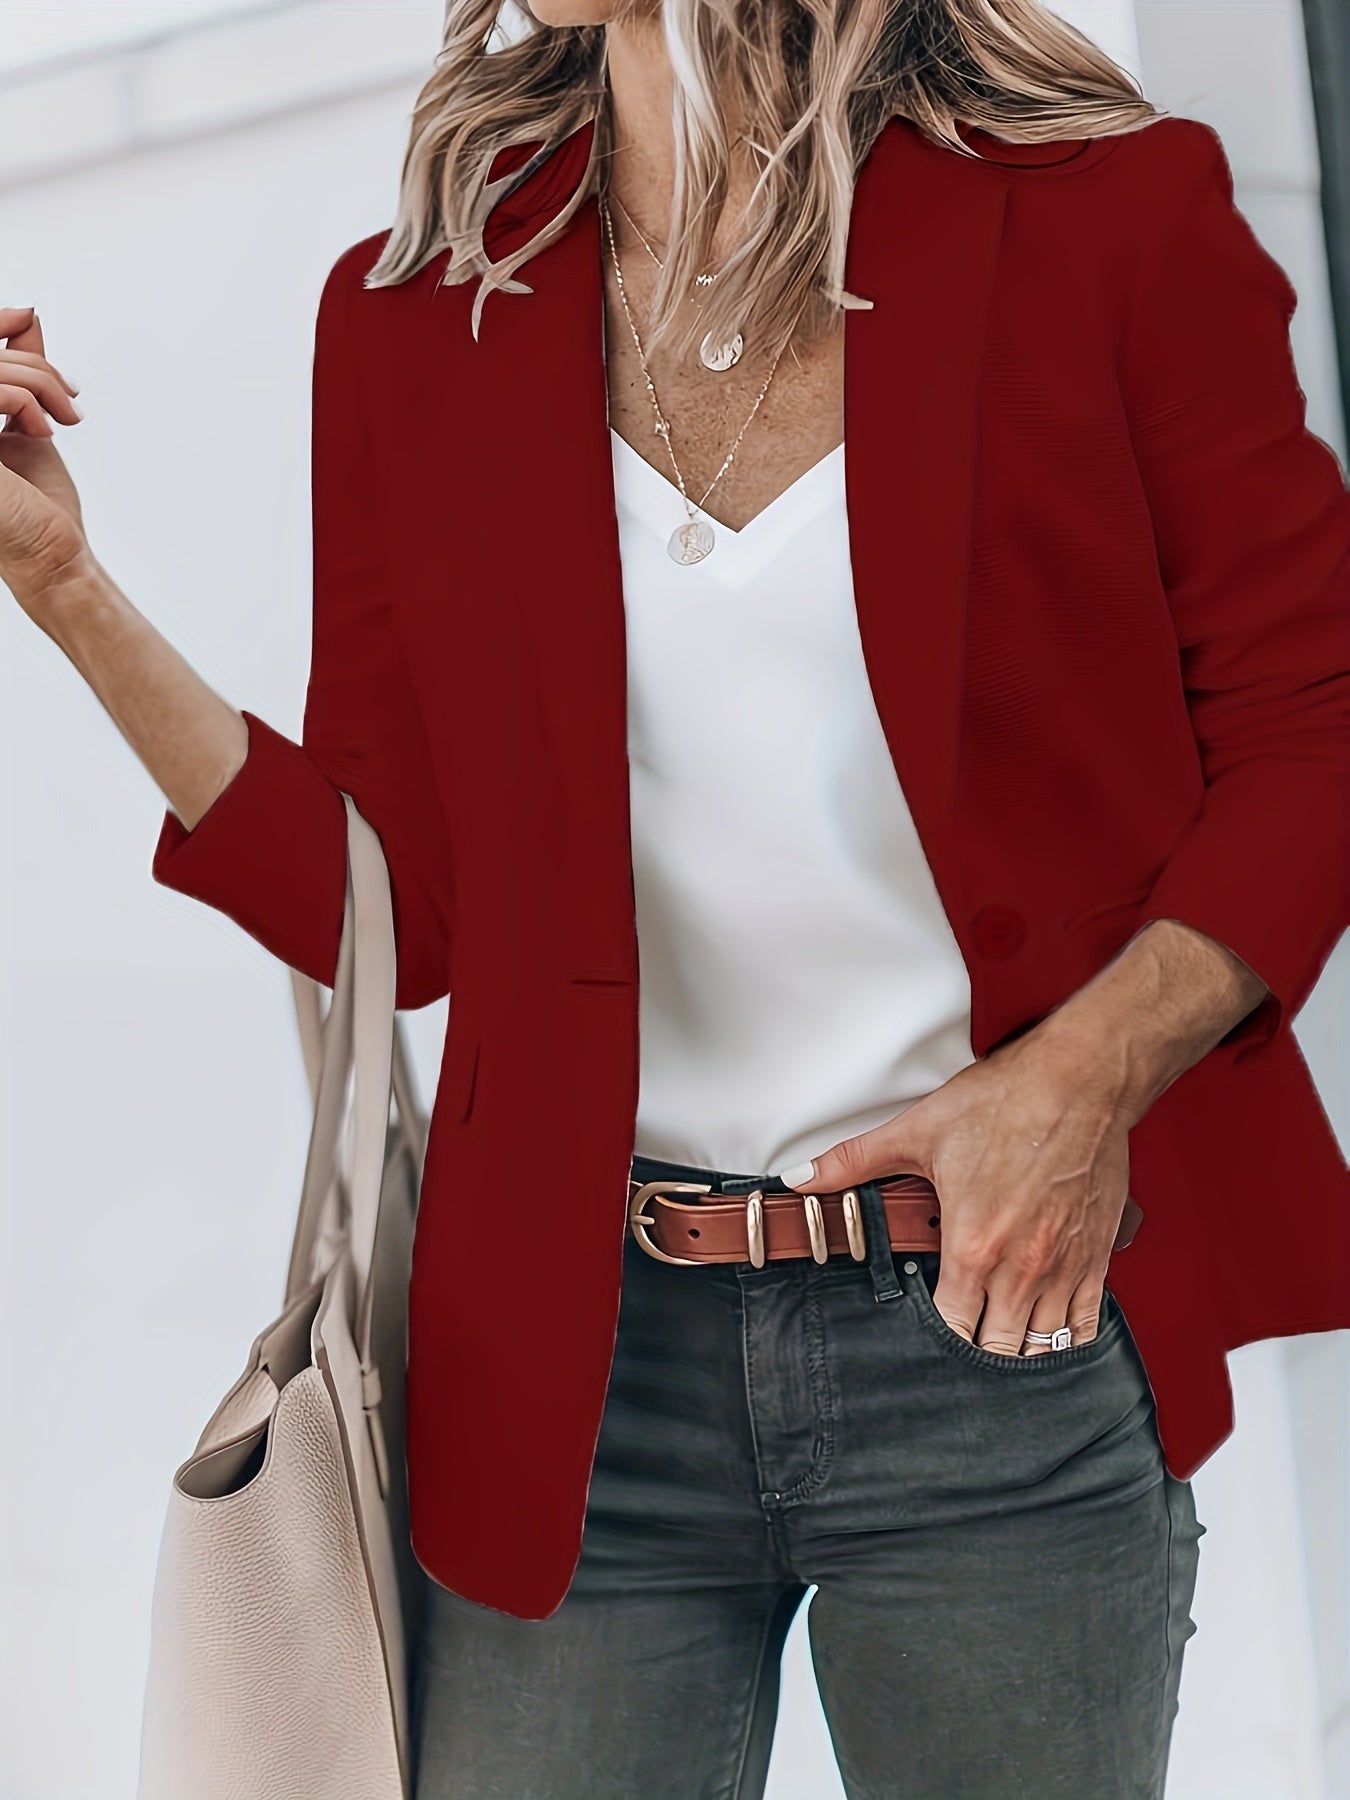 「lovevop」Solid Lapel Blazer Jacket, Casual Long Sleeve Work Office Outerwear With Pockets, Women's Clothing